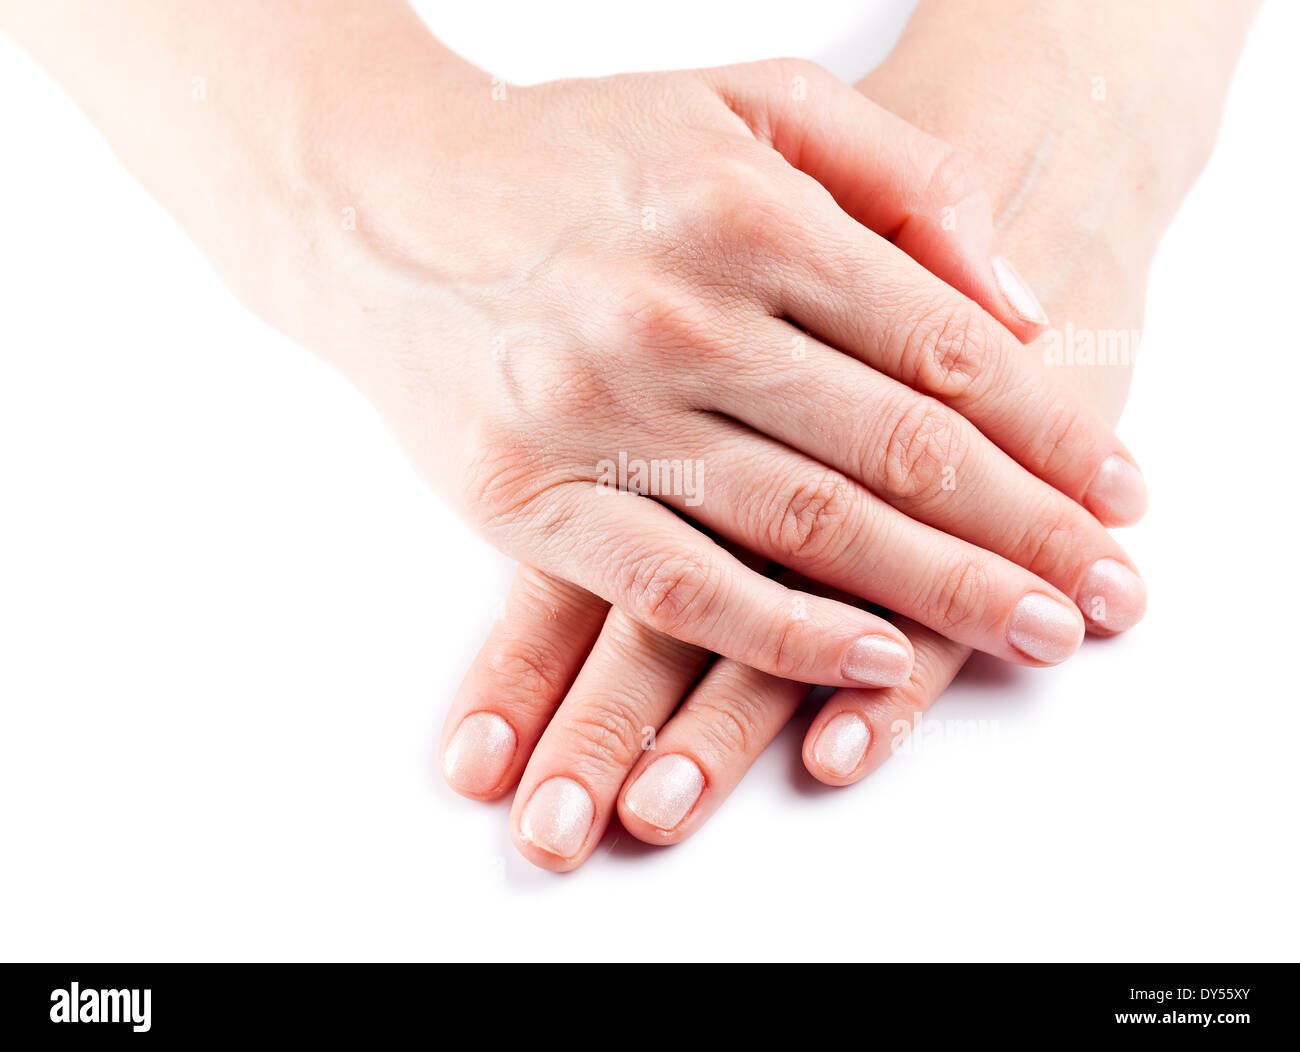 Female hand with manicure on short nails Stock Photo - Alamy